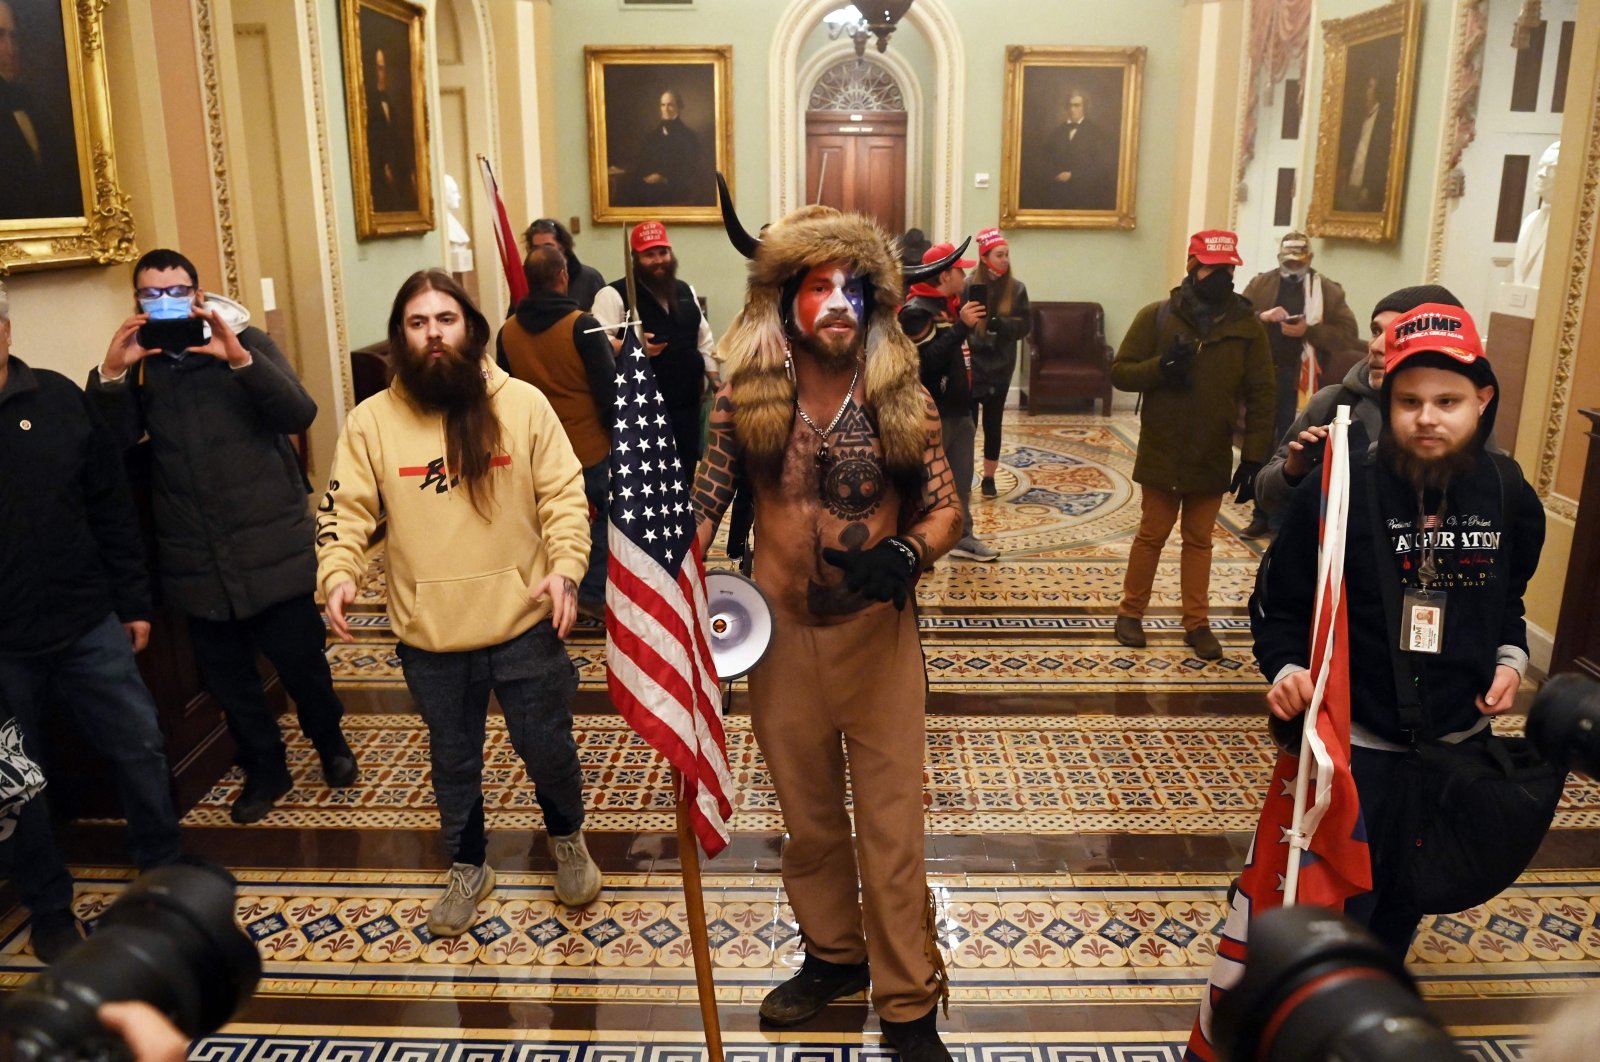 Supporters of U.S. President Donald Trump, including members of the QAnon conspiracy group Jacob Anthony Chansley, aka QAnon Shaman (C), enters the U.S. Capitol in Washington, D.C., Jan. 6, 2021. (AFP Photo)